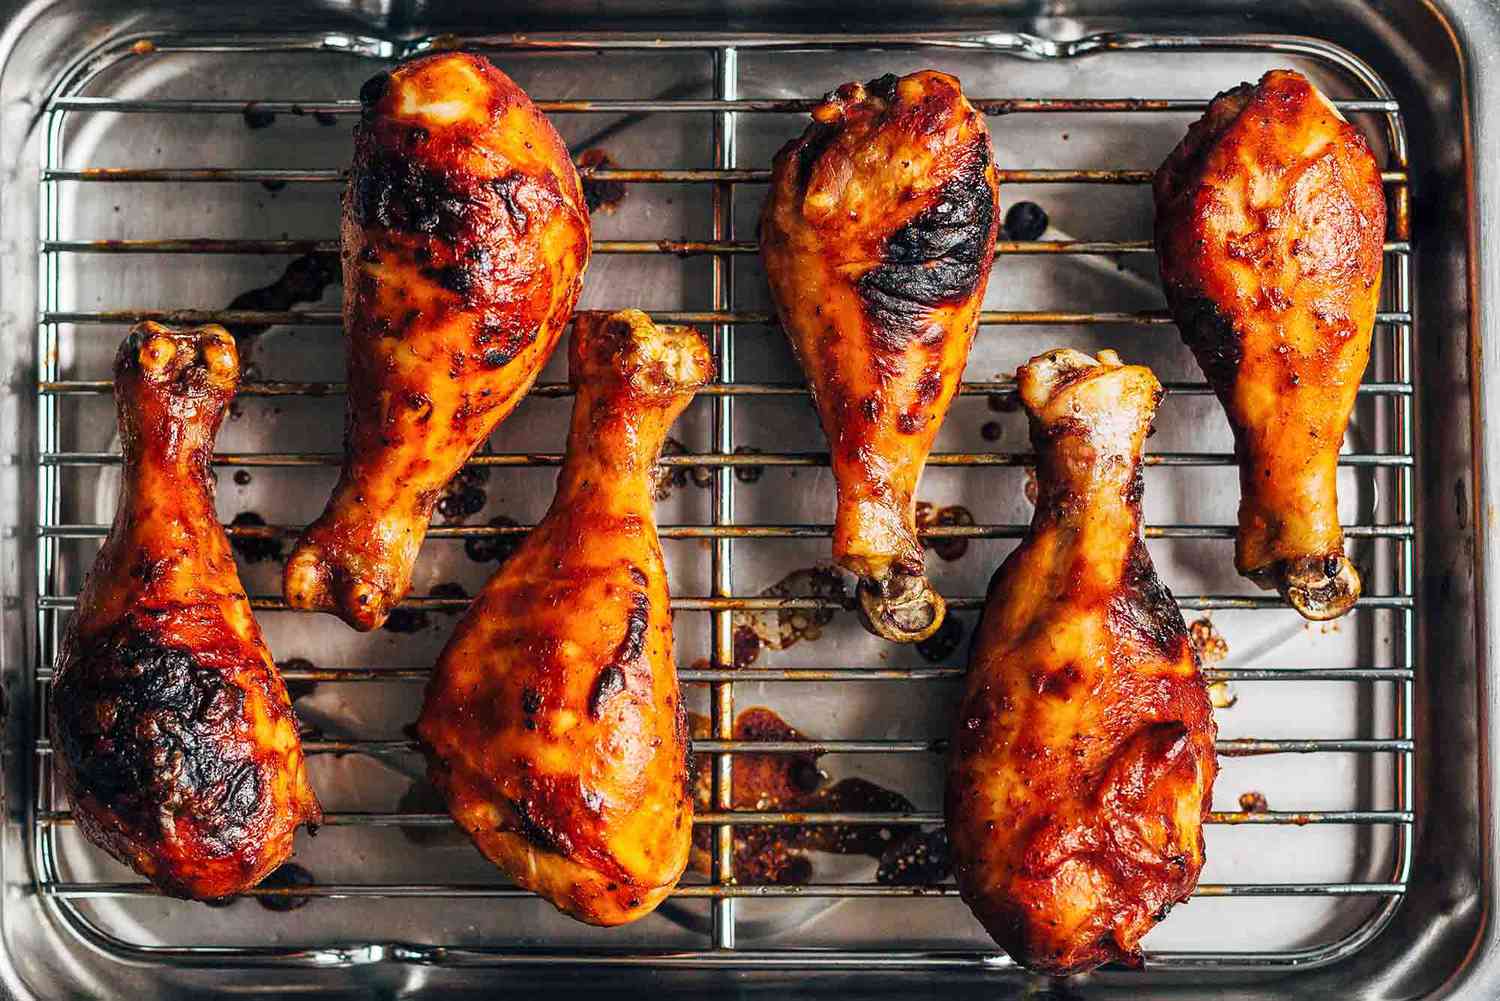 How To Grill Chicken Drumsticks In Oven - Recipes.net